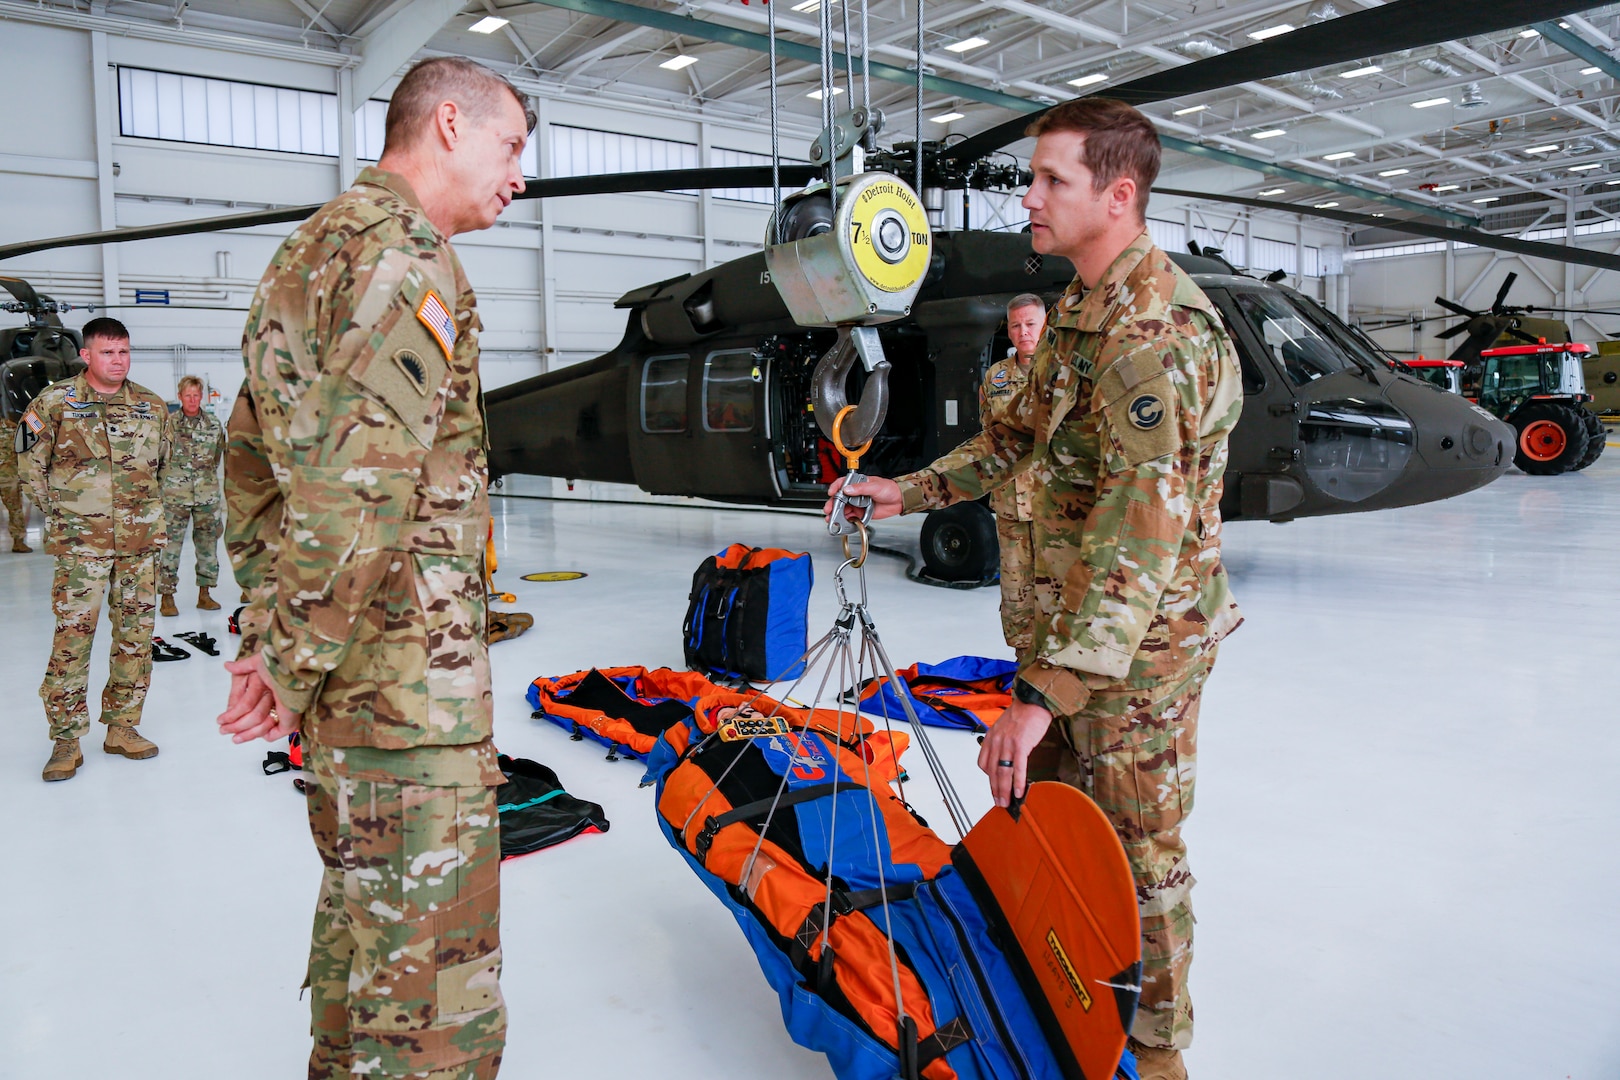 Army Gen. Daniel Hokanson, chief, National Guard Bureau, left, talks with Staff Sgt. Jeremy Hubbard, a crewmember flight instructor and Black Hawk mechanic, about the equipment the Colorado National Guard uses during airlift rescues on a visit to the Colorado National Guard's High-altitude Army National Guard Aviation Training Site, or HAATS, in Gypsum, Colorado, Oct. 16, 2022. HAATS is facilitated by Colorado Guardsmen and designed to train military pilots from any branch in power management and operating in high-altitude environments.